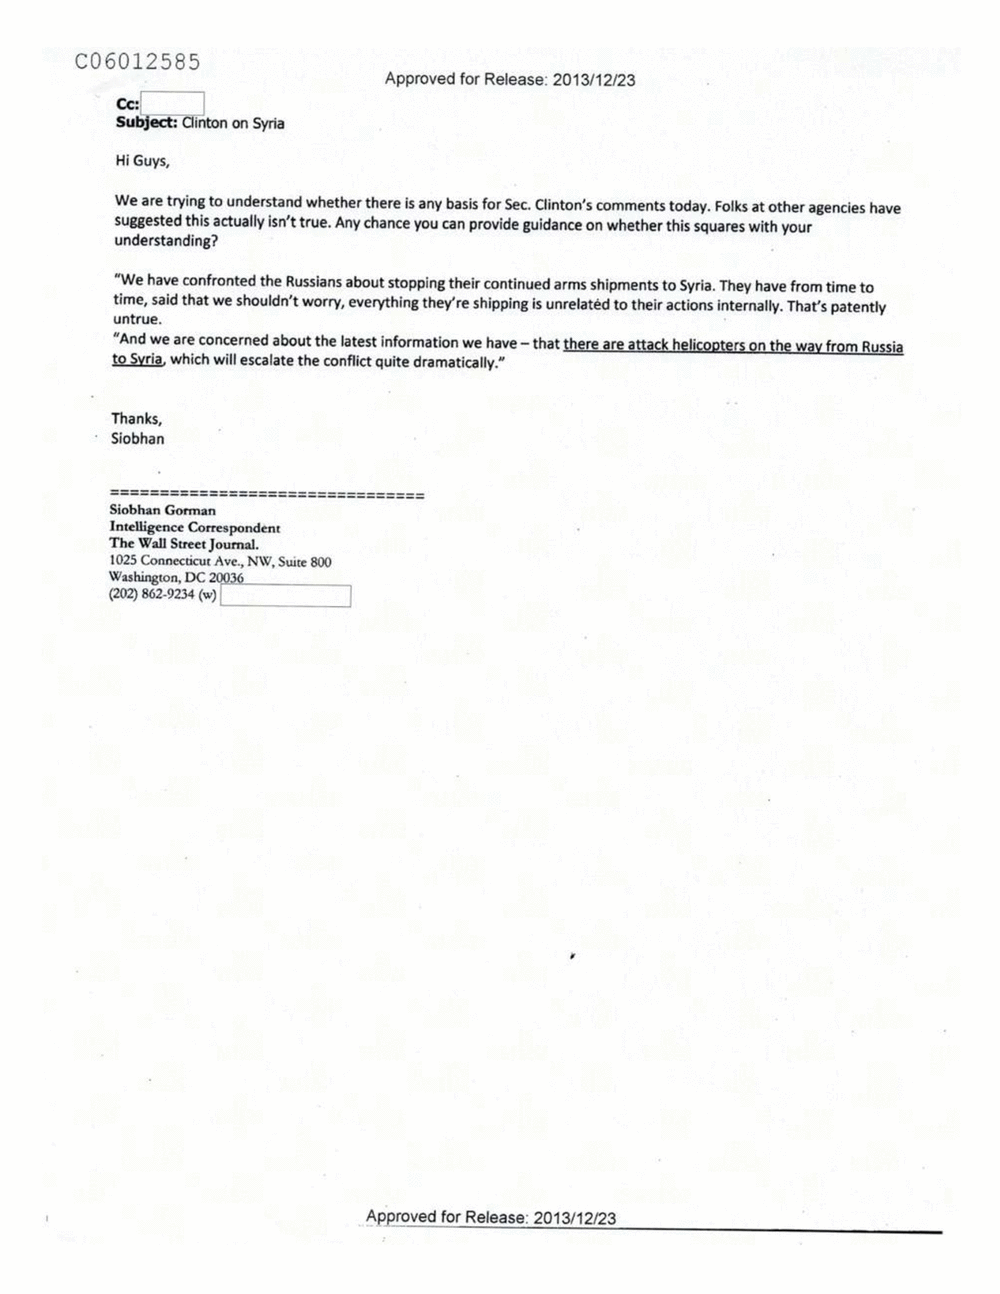 Page 130 from Email Correspondence Between Reporters and CIA Flacks